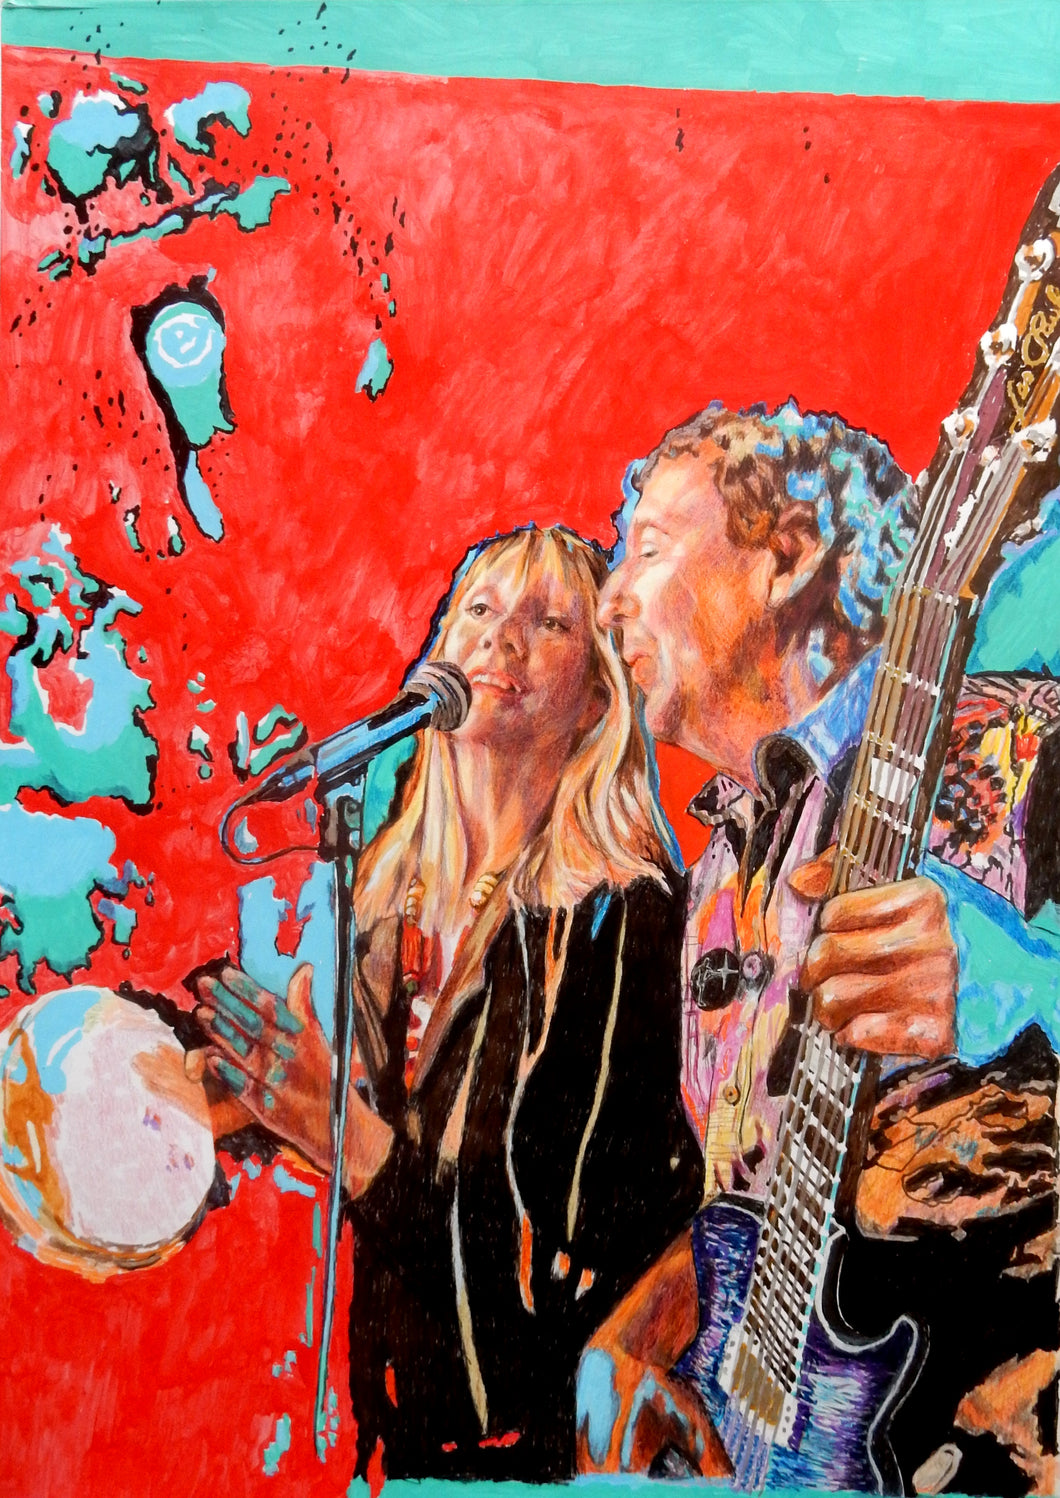 Rock experience drawing by Stella Tooth portrait artist specialising in musicians